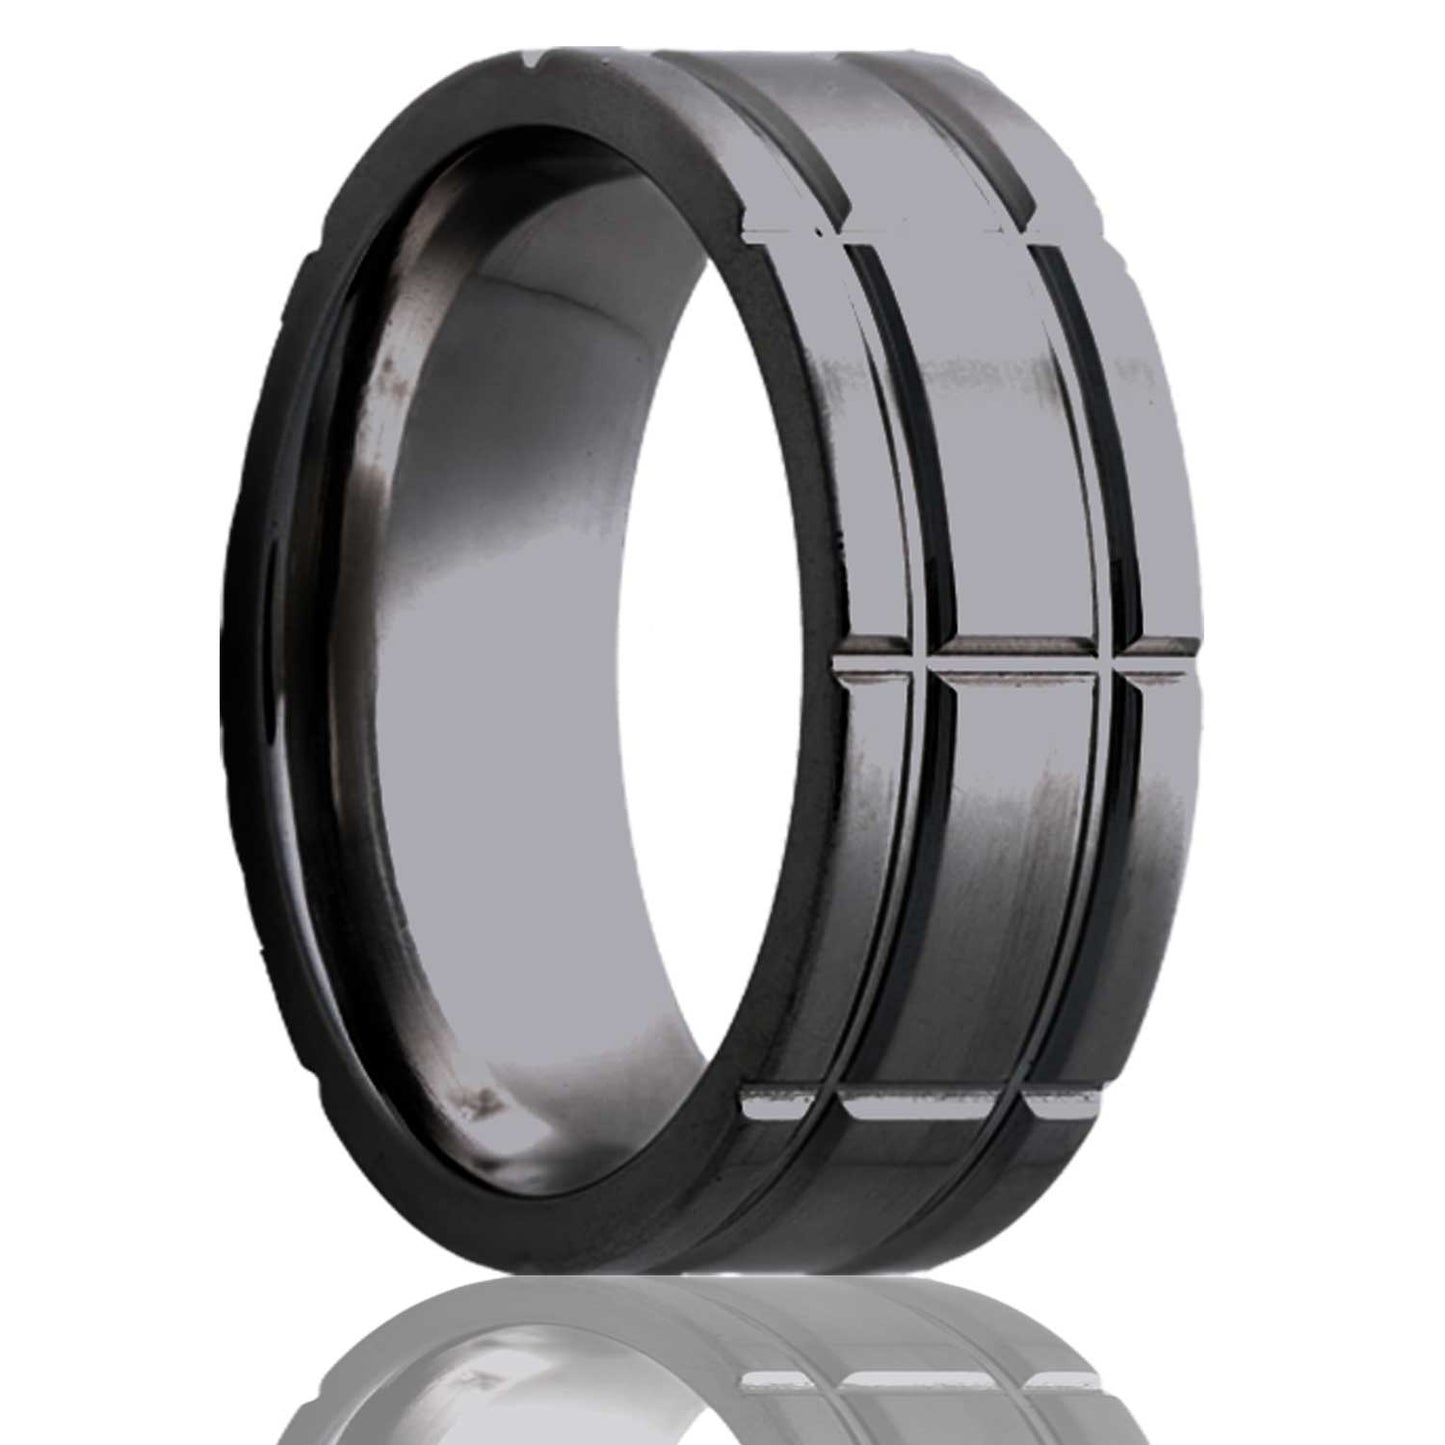 A intersecting groove pattern zirconium men's wedding band displayed on a neutral white background.